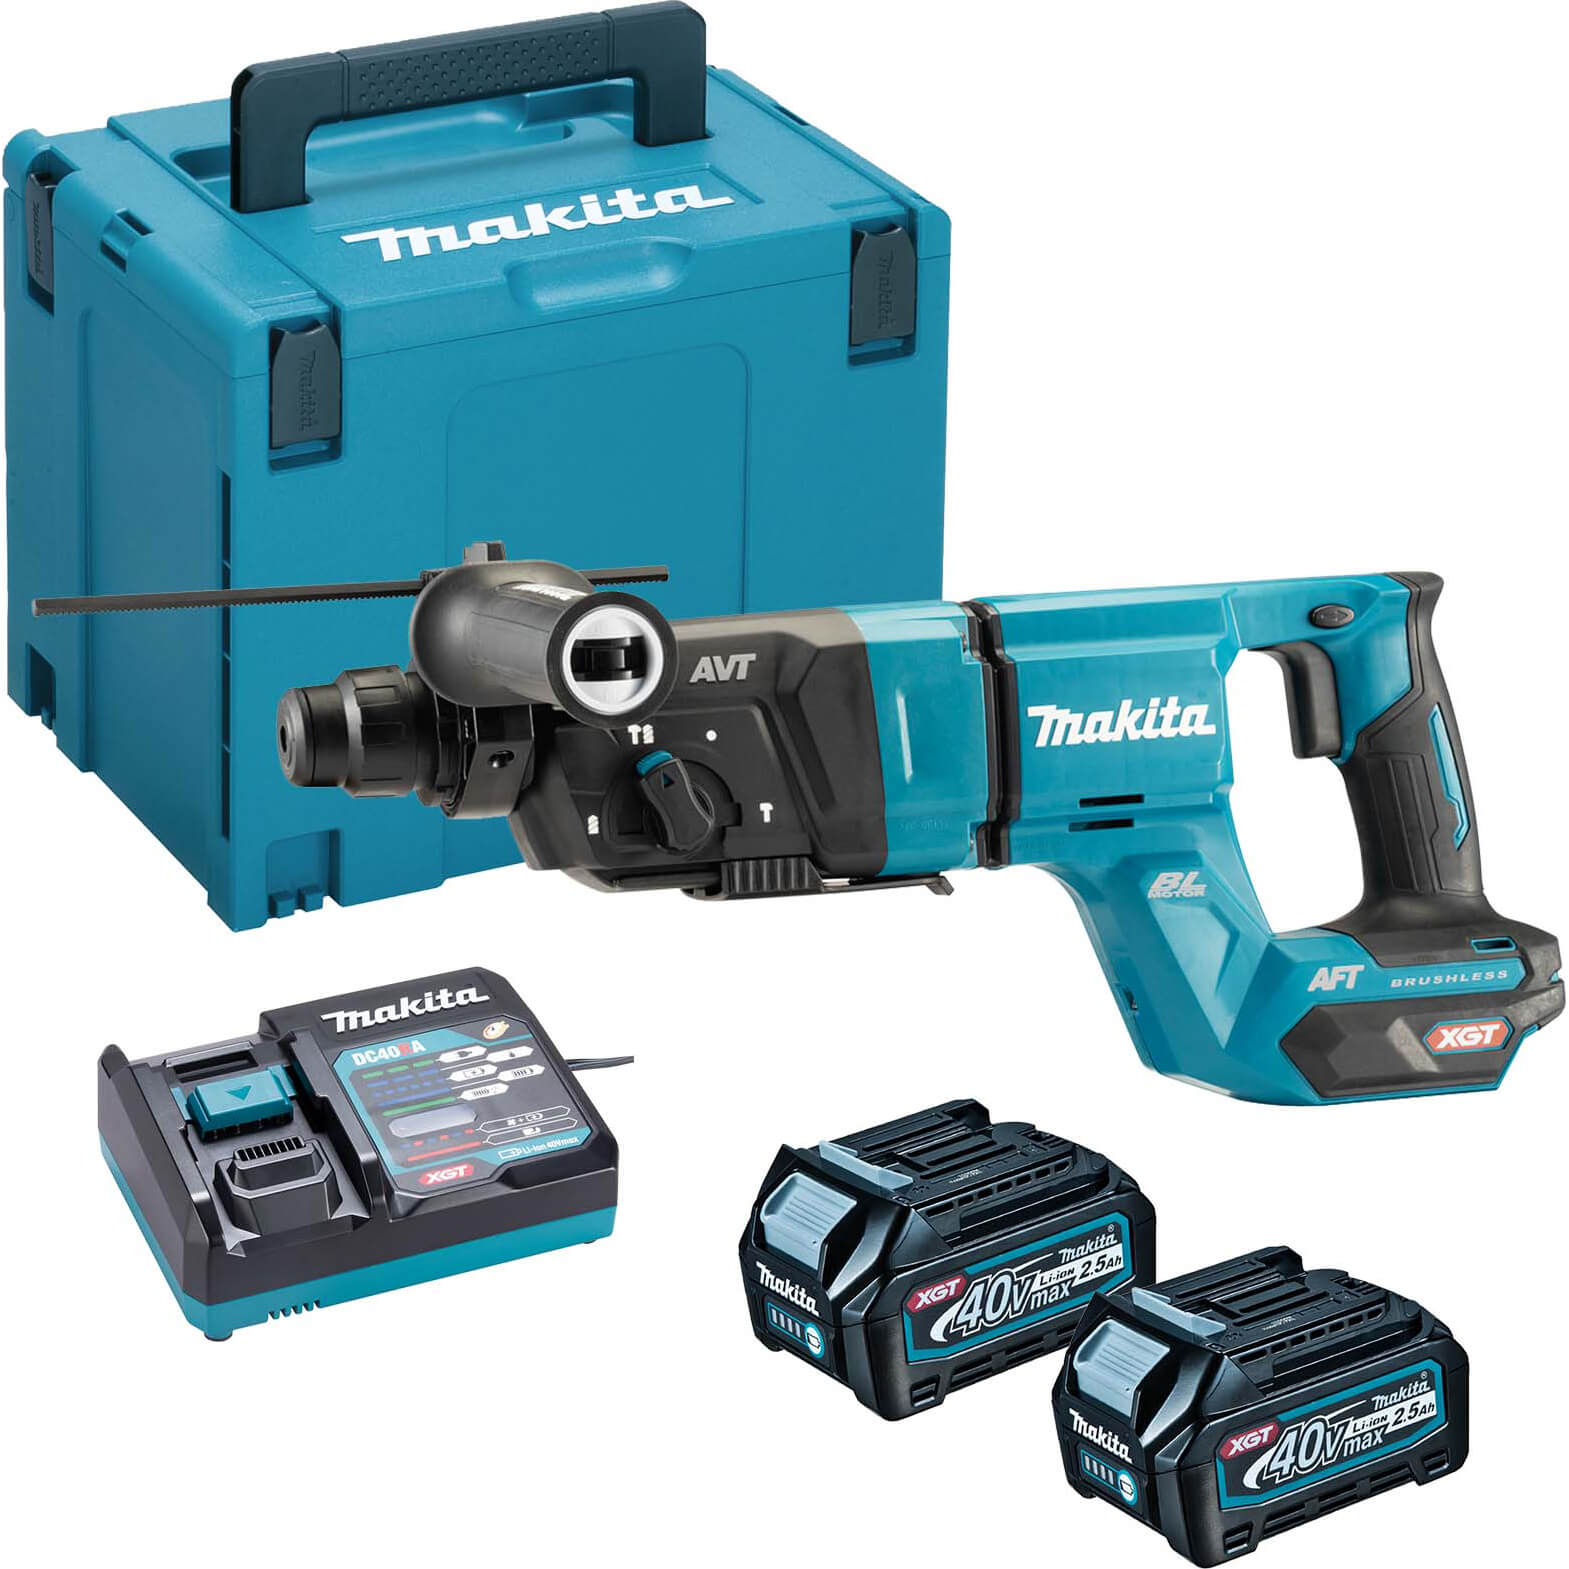 Image of Makita HR007G 40v Max XGT Cordless Brushless SDS Plus Rotary Hammer Drill 2 x 2.5ah Li-ion Charger Case